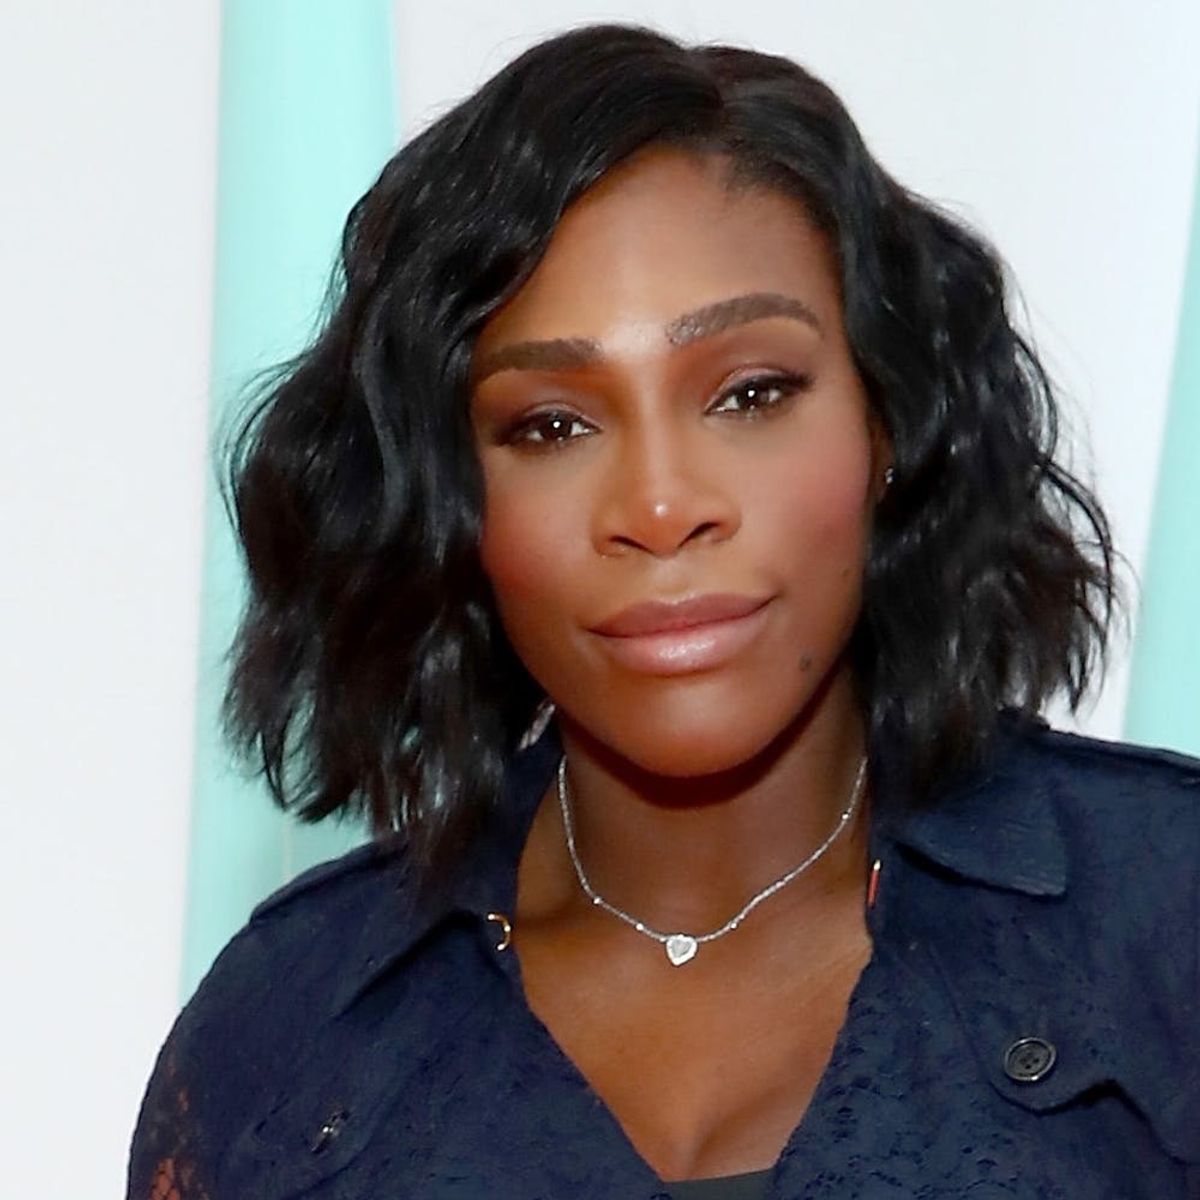 Serena Williams Might Have the Healthiest Pregnancy Cravings Ever